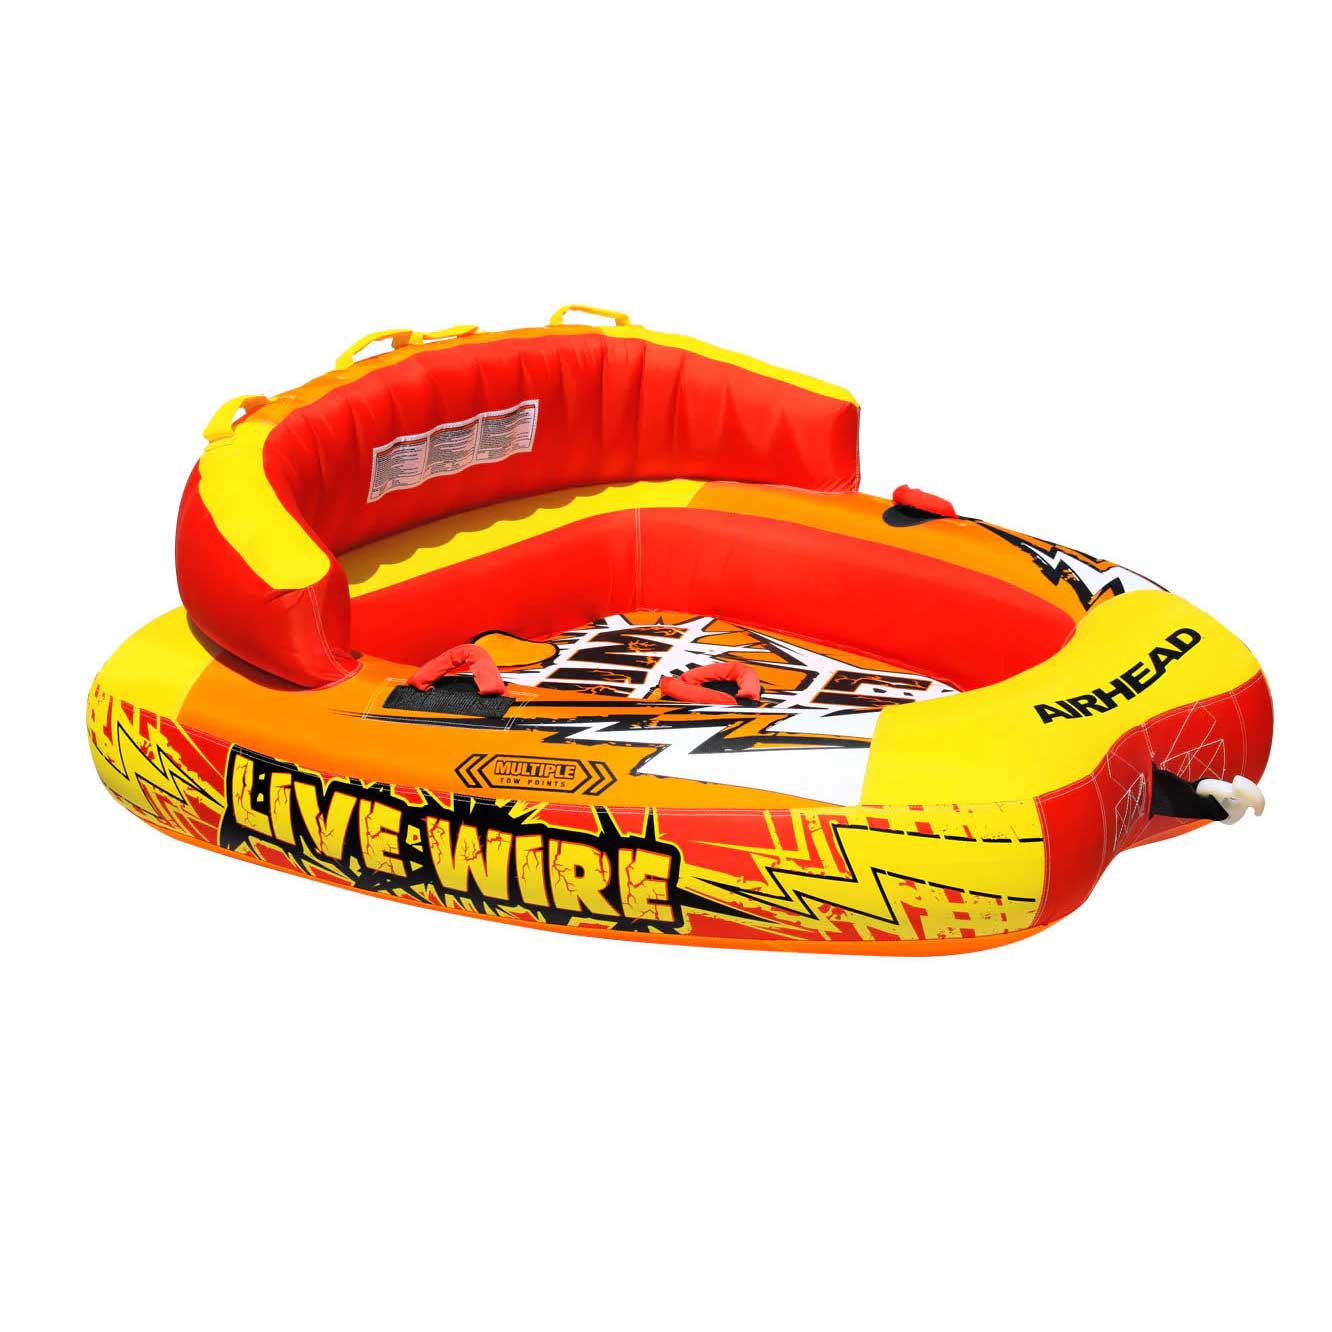 AIRHEAD Live Wire Capacity 2 people 44738 Rubber boat Banana boat Water toy Tong tube